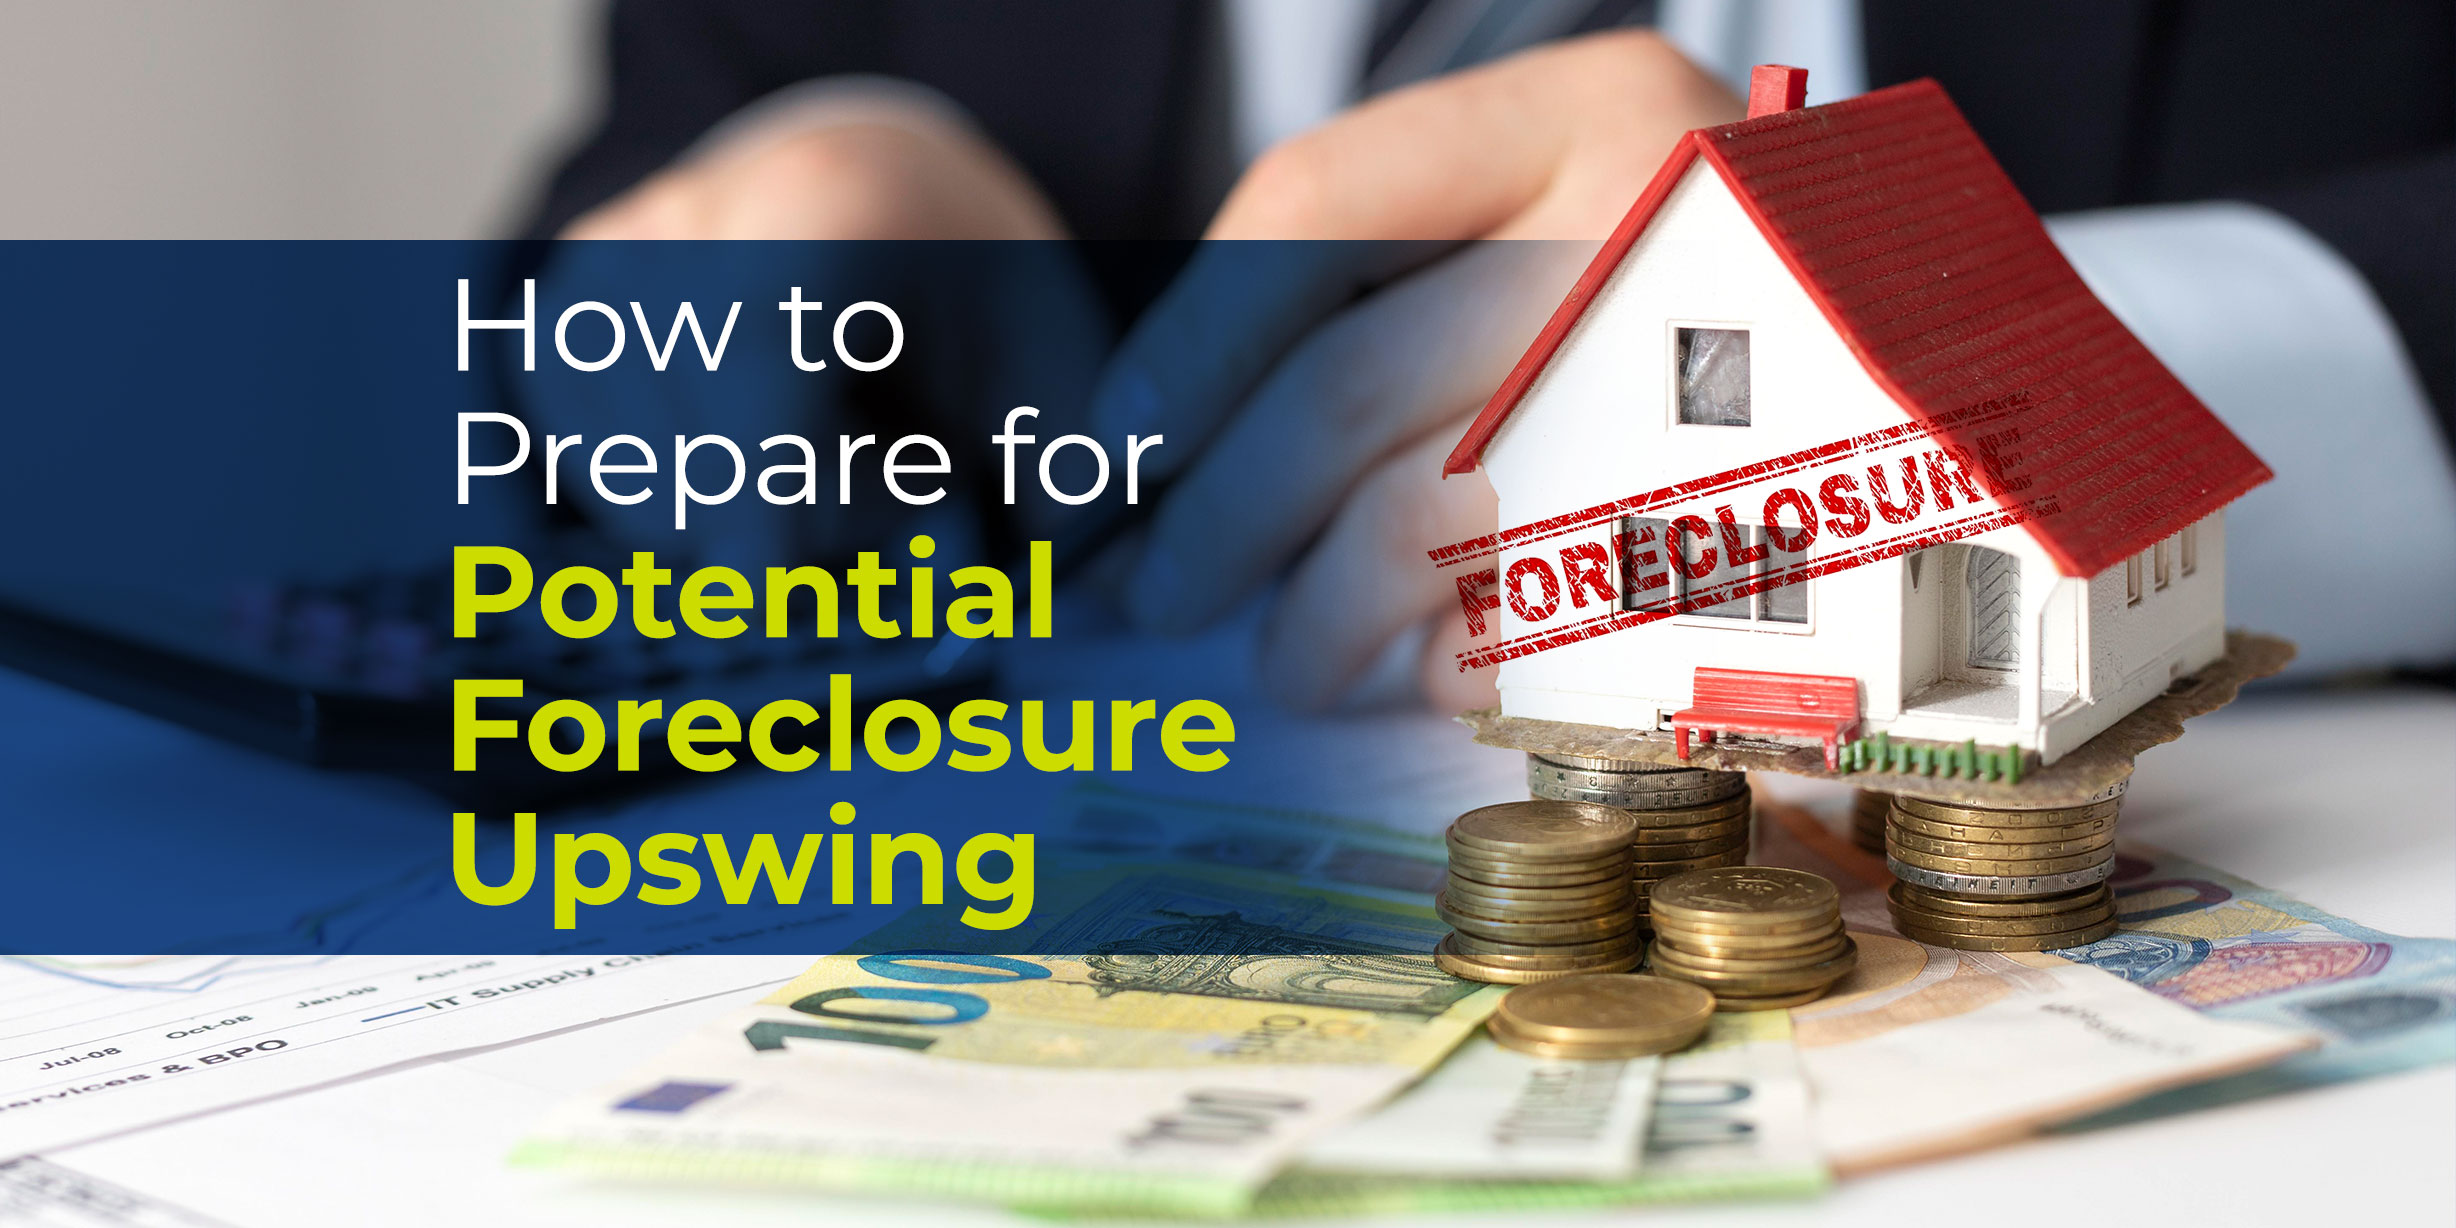 How to Prepare for Potential Foreclosure Upswing